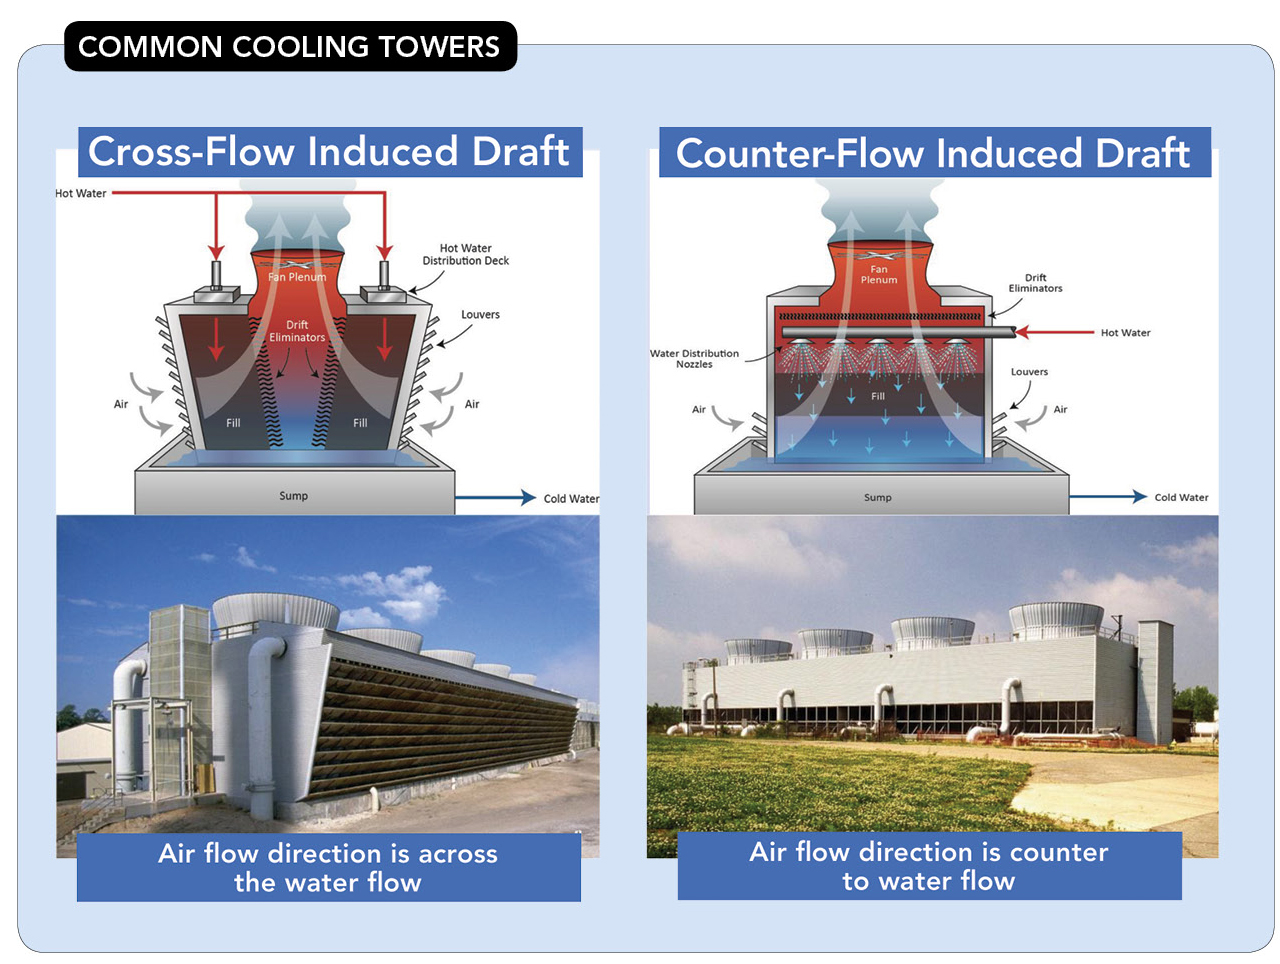 What Are Cooling Towers Made Of?